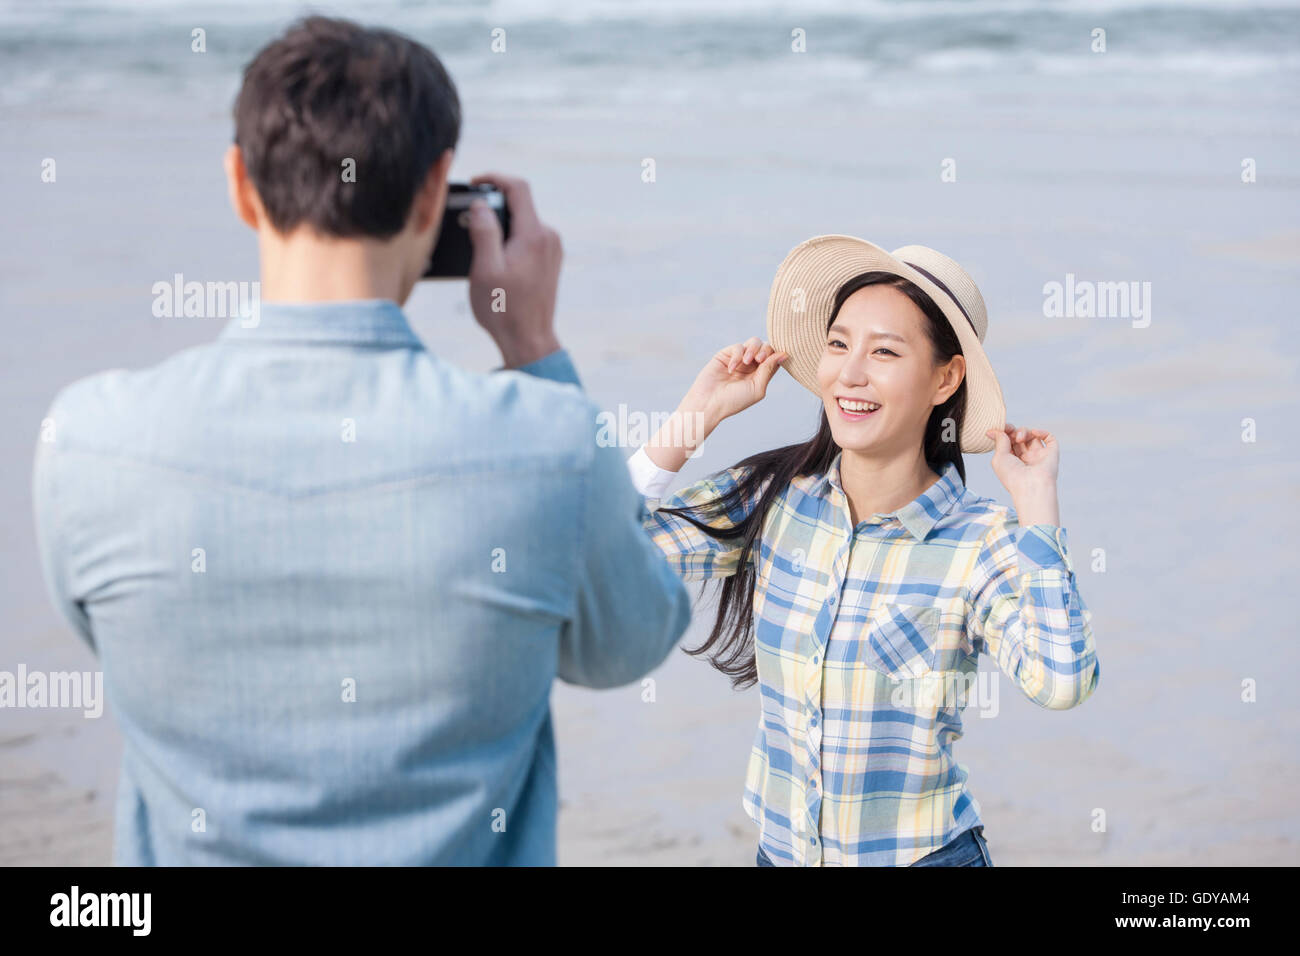 Portrait of young smiling couple posing and taking a picture against sea Stock Photo